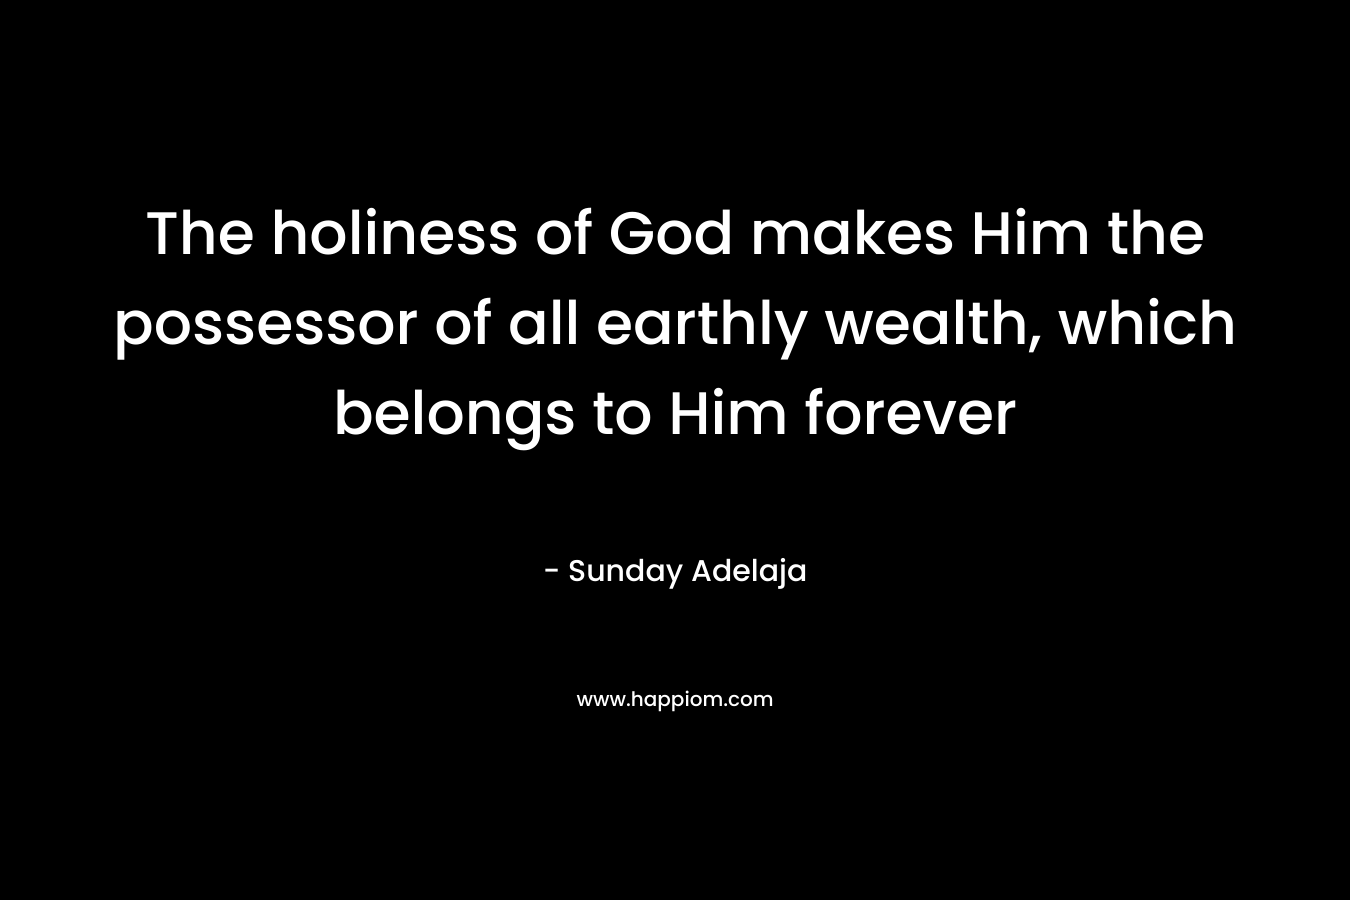 The holiness of God makes Him the possessor of all earthly wealth, which belongs to Him forever